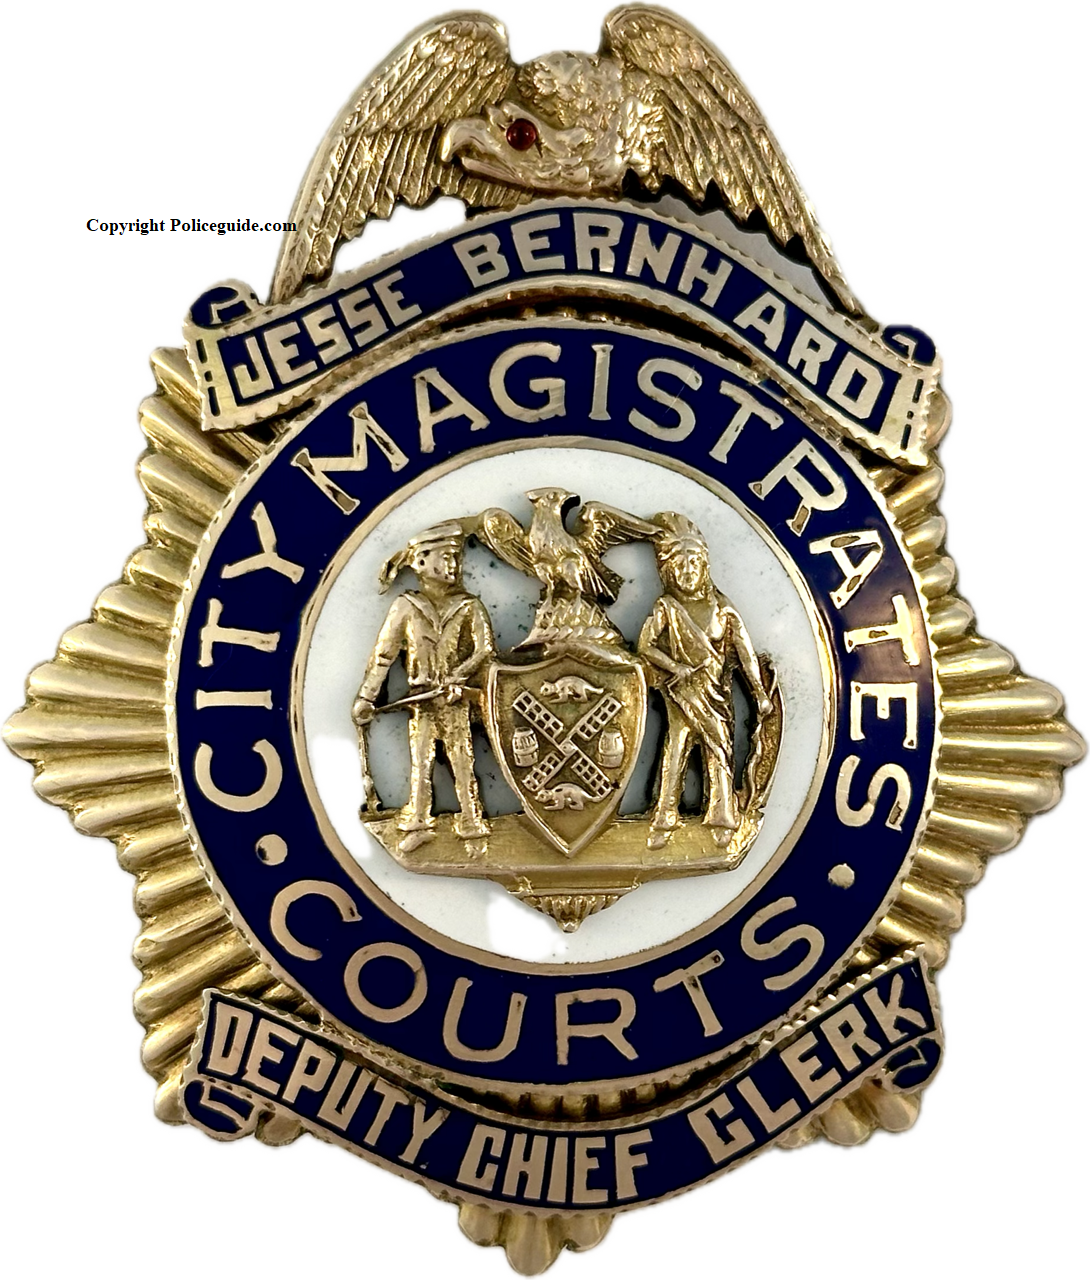 Jesse Bernhard City Magistrates Courts Deputy Chief Clerk, hallmarked Dunn Jewelry Co. N.Y. Gold Filled Guaranteed.